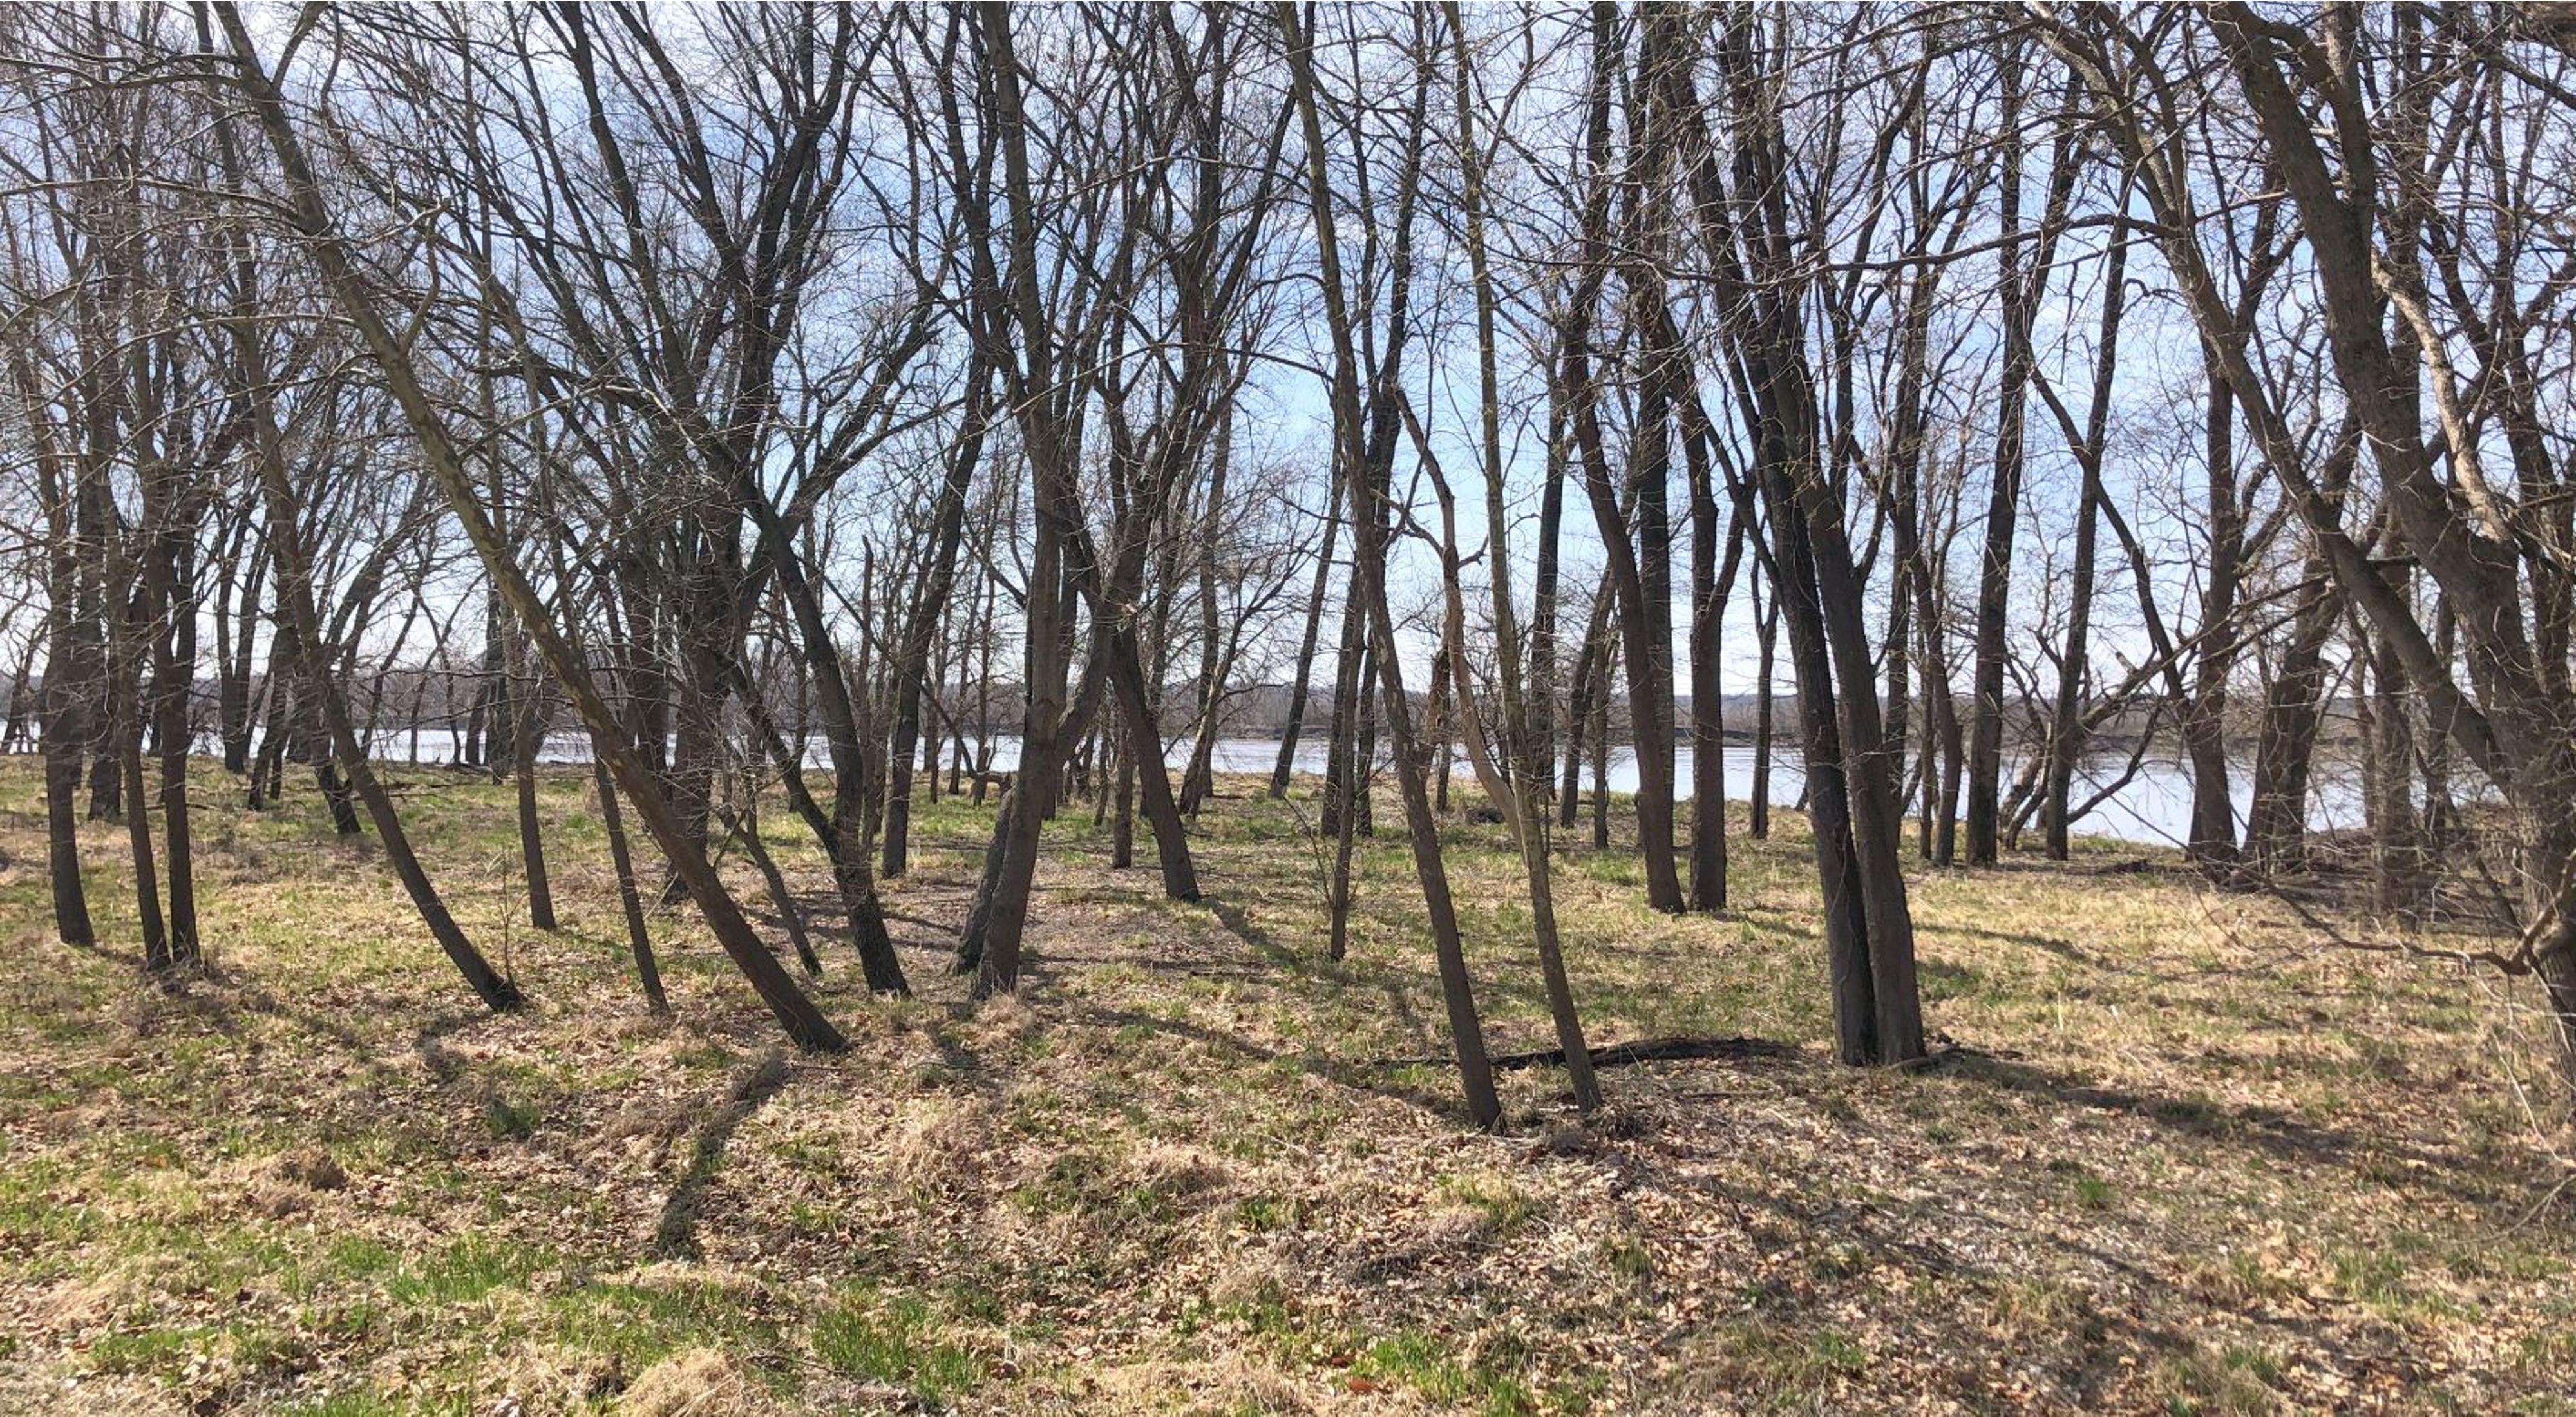 A group of trees line the bank of the Missouri River.